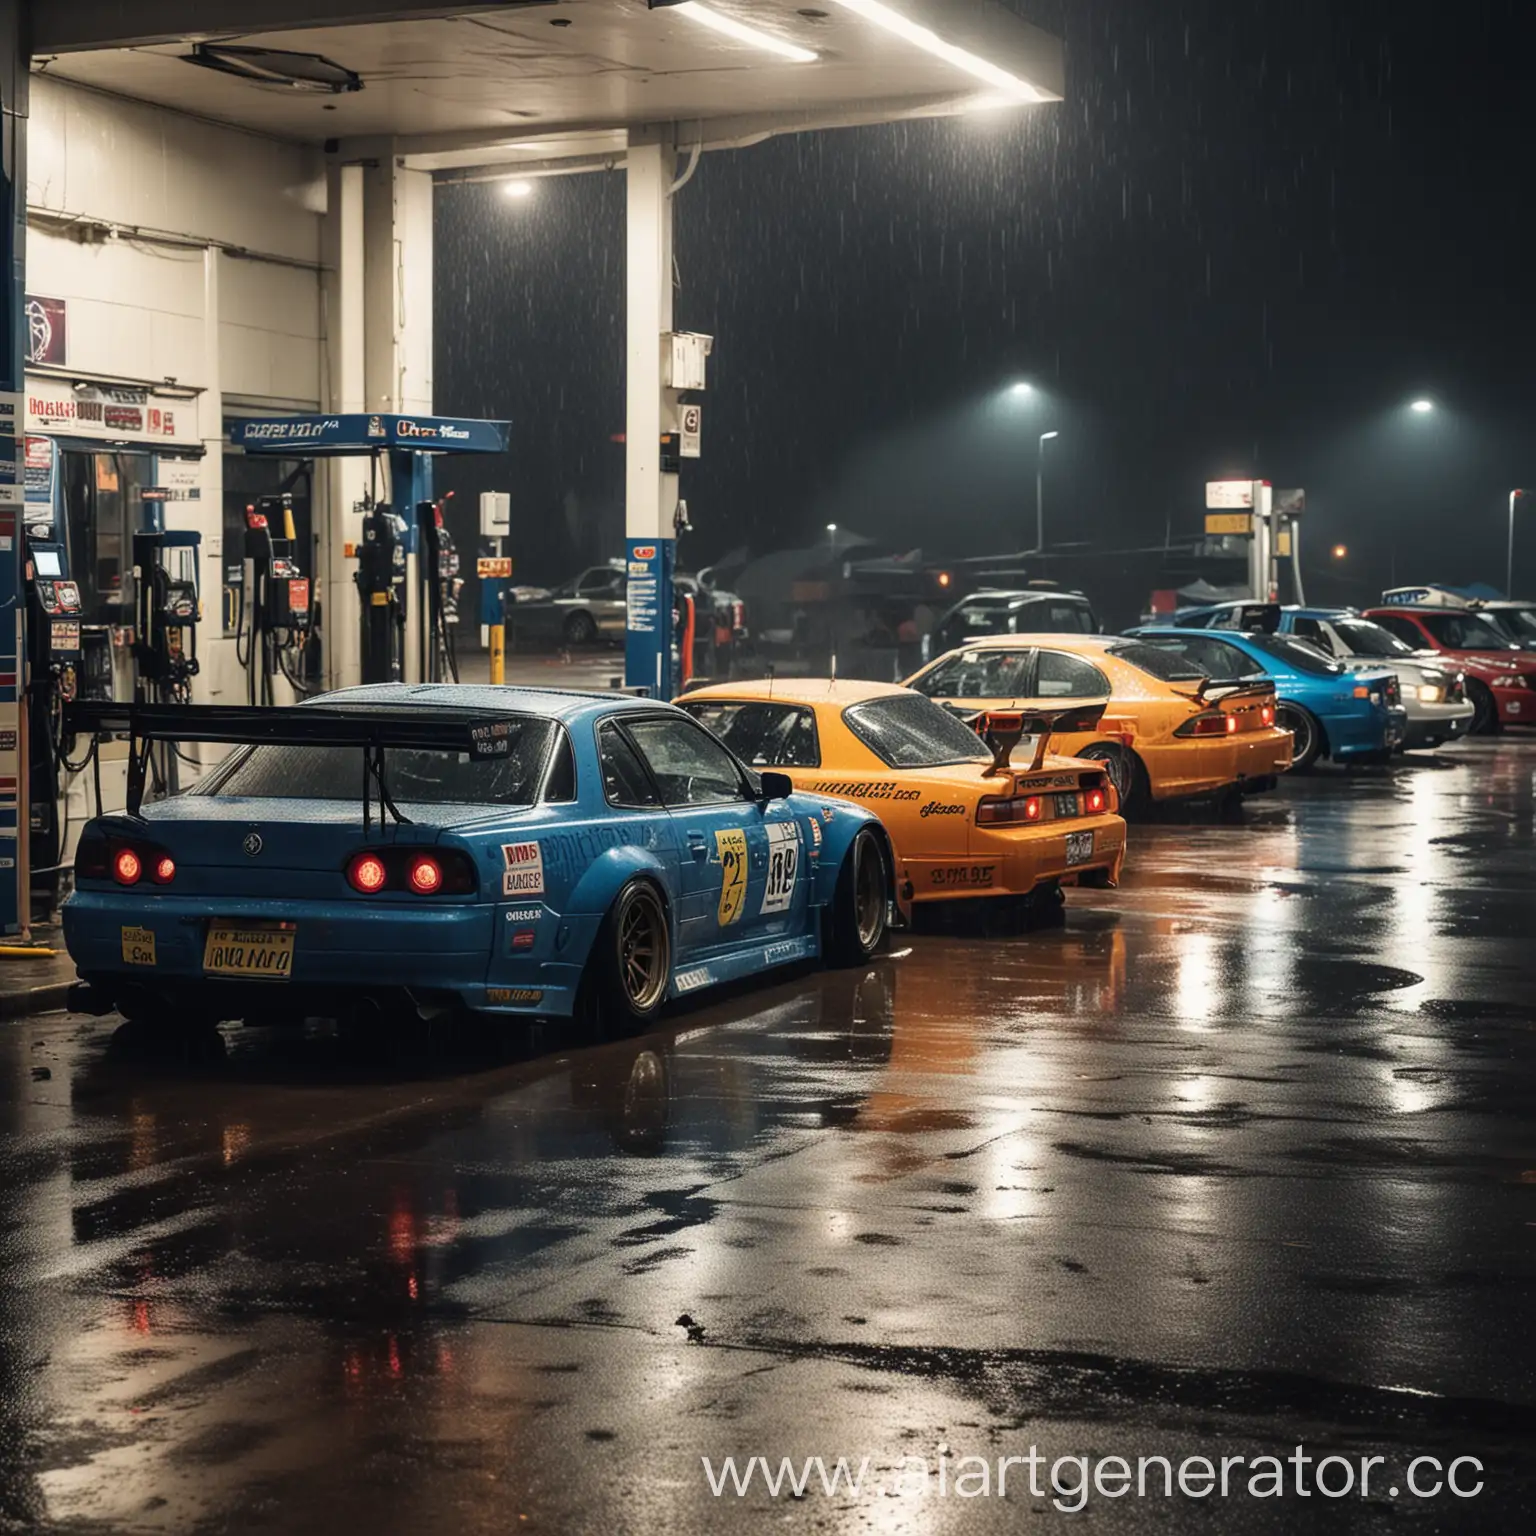 Drift-Cars-Parked-Overnight-in-Rain-at-Gas-Station